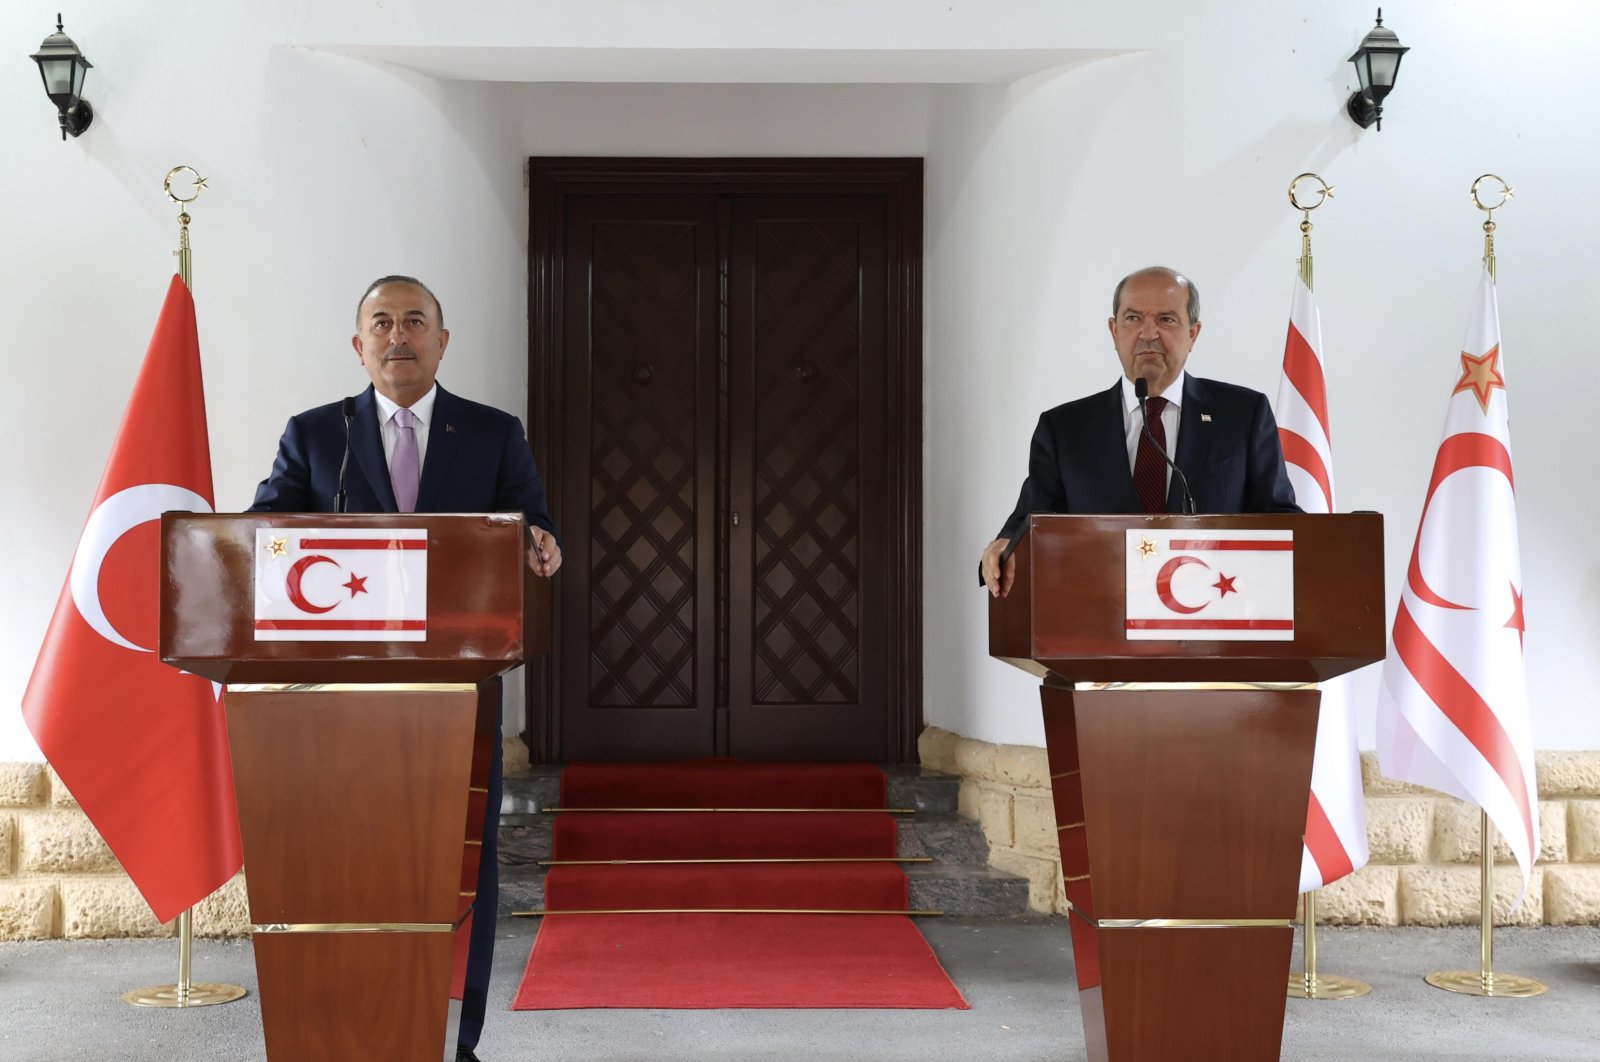 Foreign Minister Mevlüt Çavuşoğlu and TRNC President Ersin Tatar hold a joint news conference in Lefkoşa, Turkish Cyprus, June 13, 2022. (AA Photo)